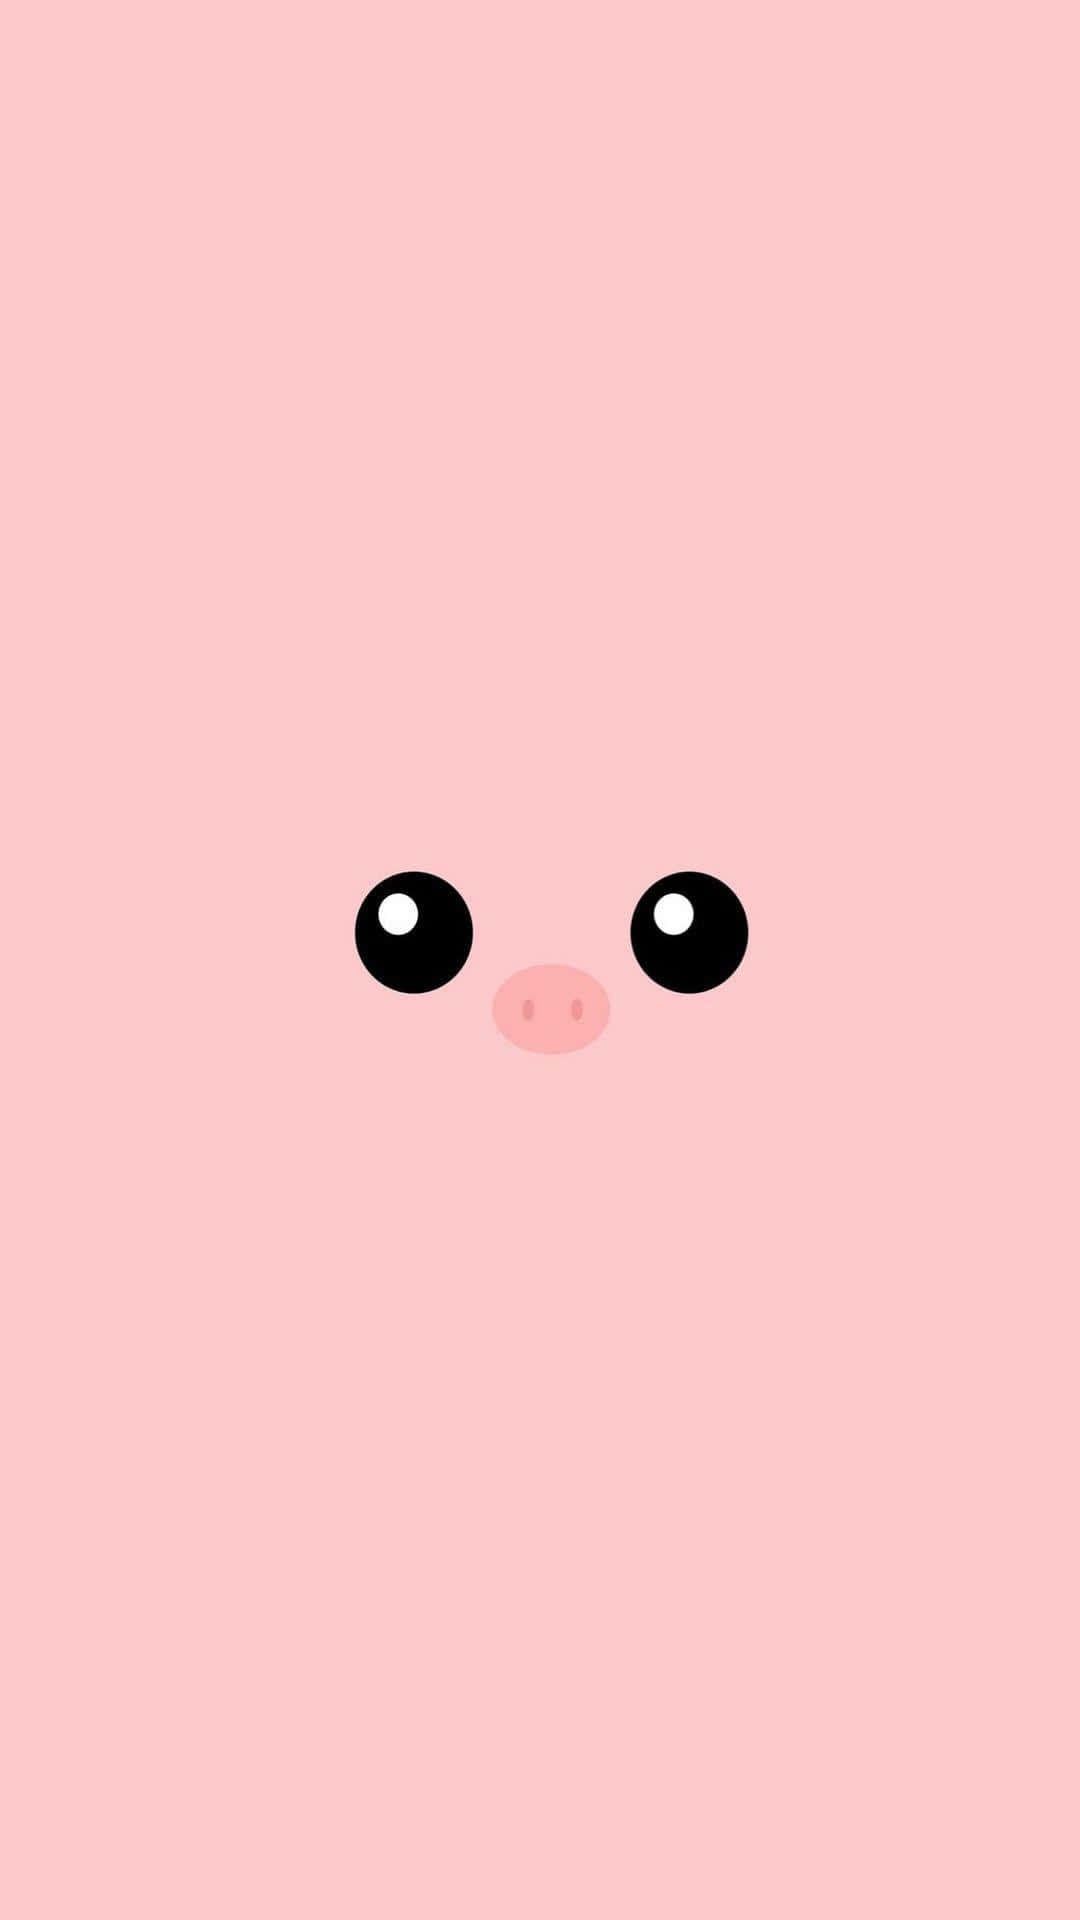 A Pink Pig Face With Black Eyes